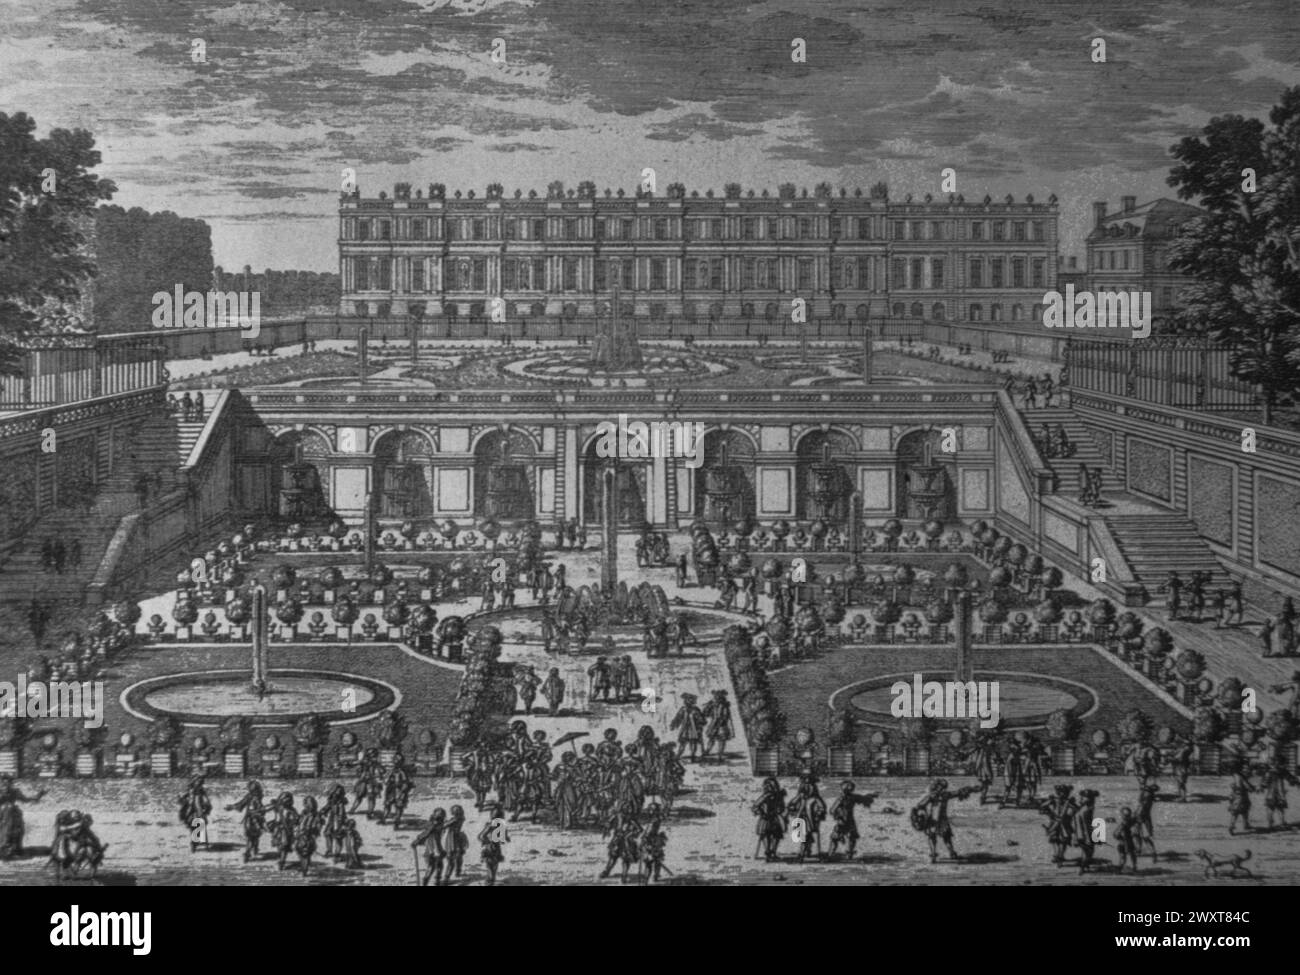 The Orangerie at the Palace of Versailles, engraving, 17th century Stock Photo